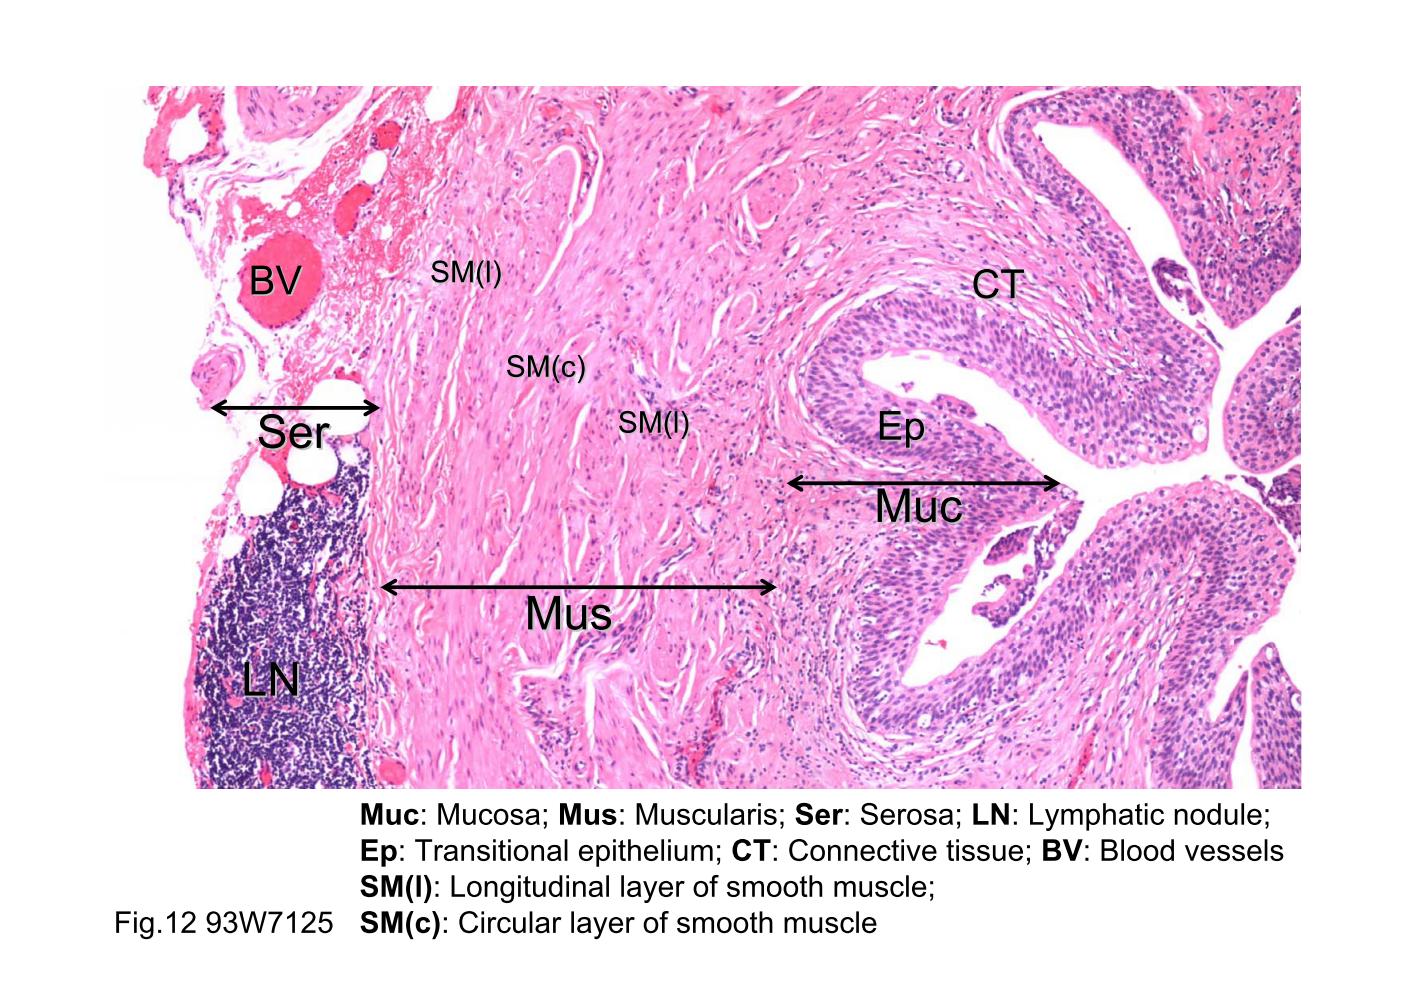 block8_21.jpg - Fig.12 93W7125, Ureter (cs) , HE. The thick epitheliai liningis the transitional epithelium (Ep). The remainder of the wall ismade up of connective tissue (CT) and smooth muscle. Thetransitional epithelium and its supporting connective tissueconstitute the mucosa (Muc). A distinct submucosa is notpresent. The muscularis (Mus) is arranged as an innerlongitudinal layer (SM(l)), a middle circular layer (SM(c)), andan outer longitudinal layer (SM(l)). However, the outerlongitudinal layer is present only at the lower end of the ureter.By the way, there are blood vessels (BV) and lymphaticnodule (LN) in the serosa (Ser).